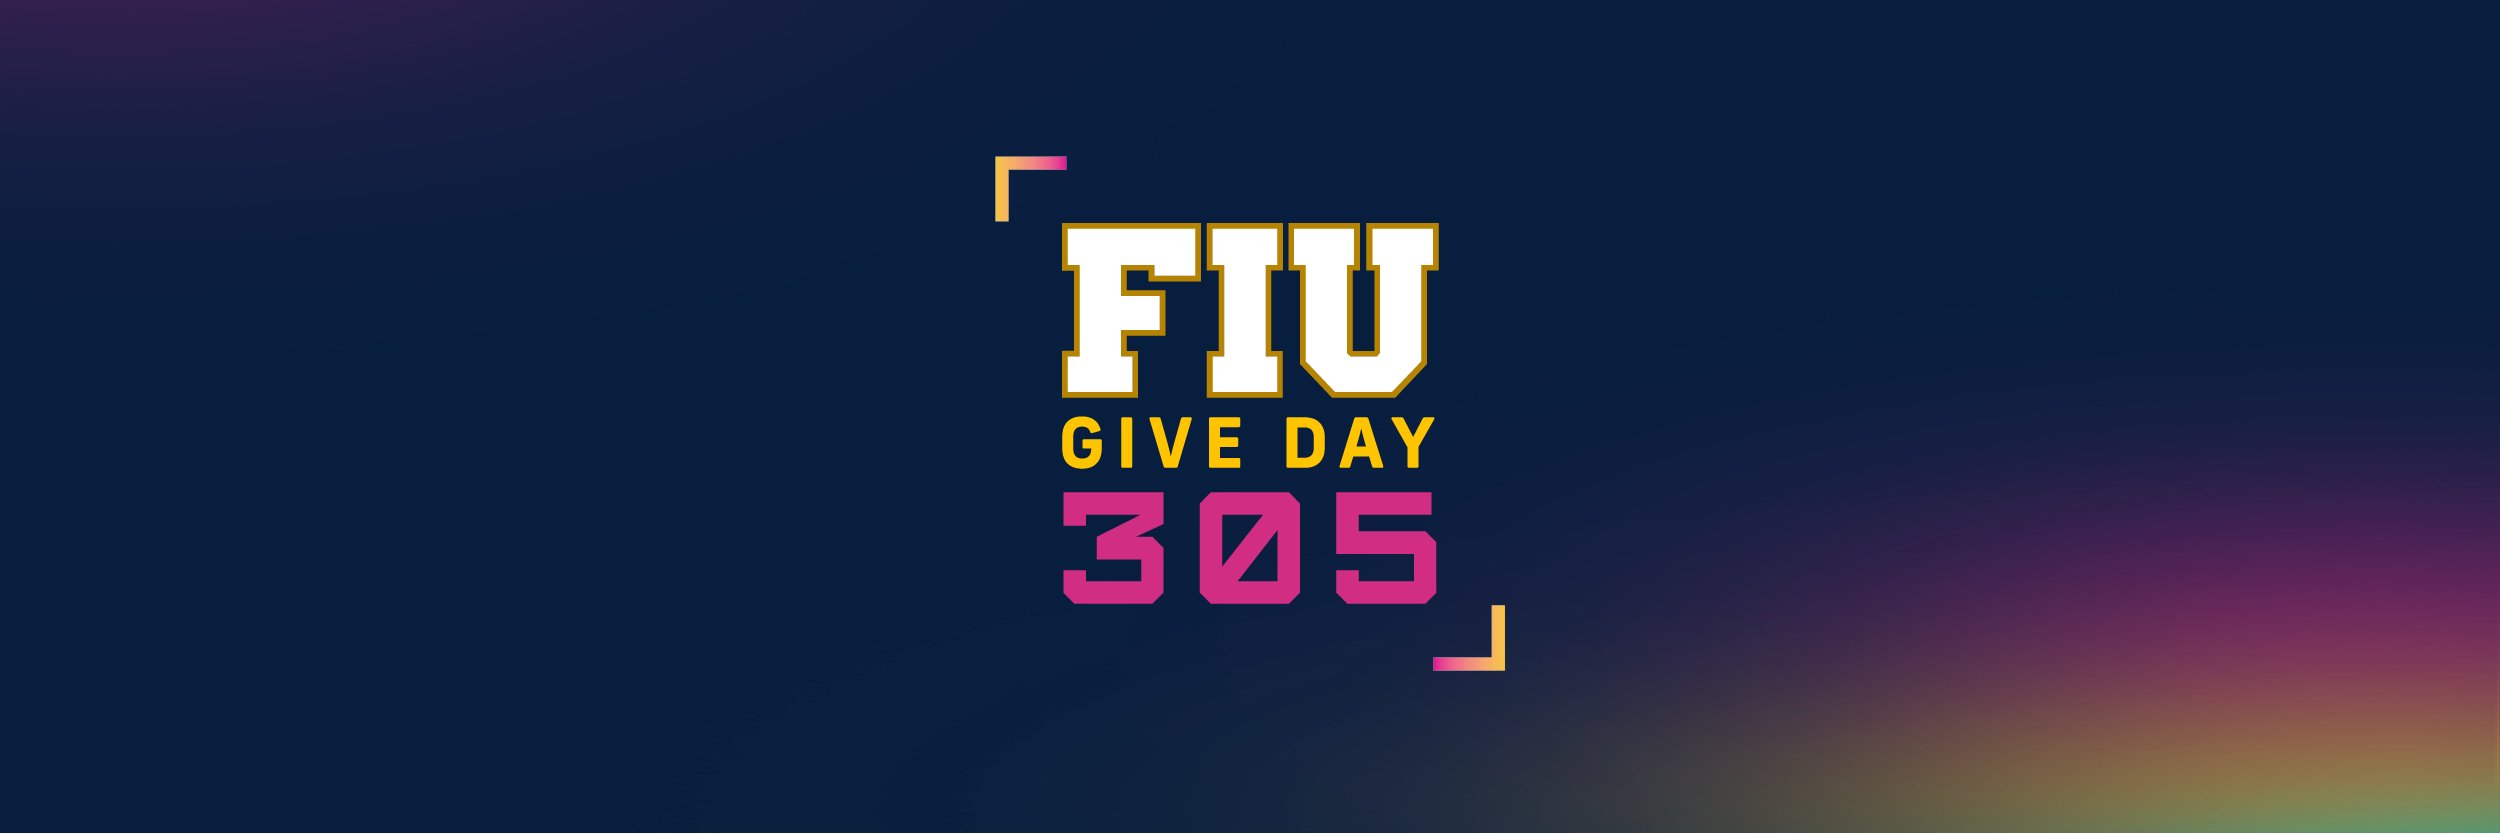 fiu305giveday_2023_emailheaders-01.png